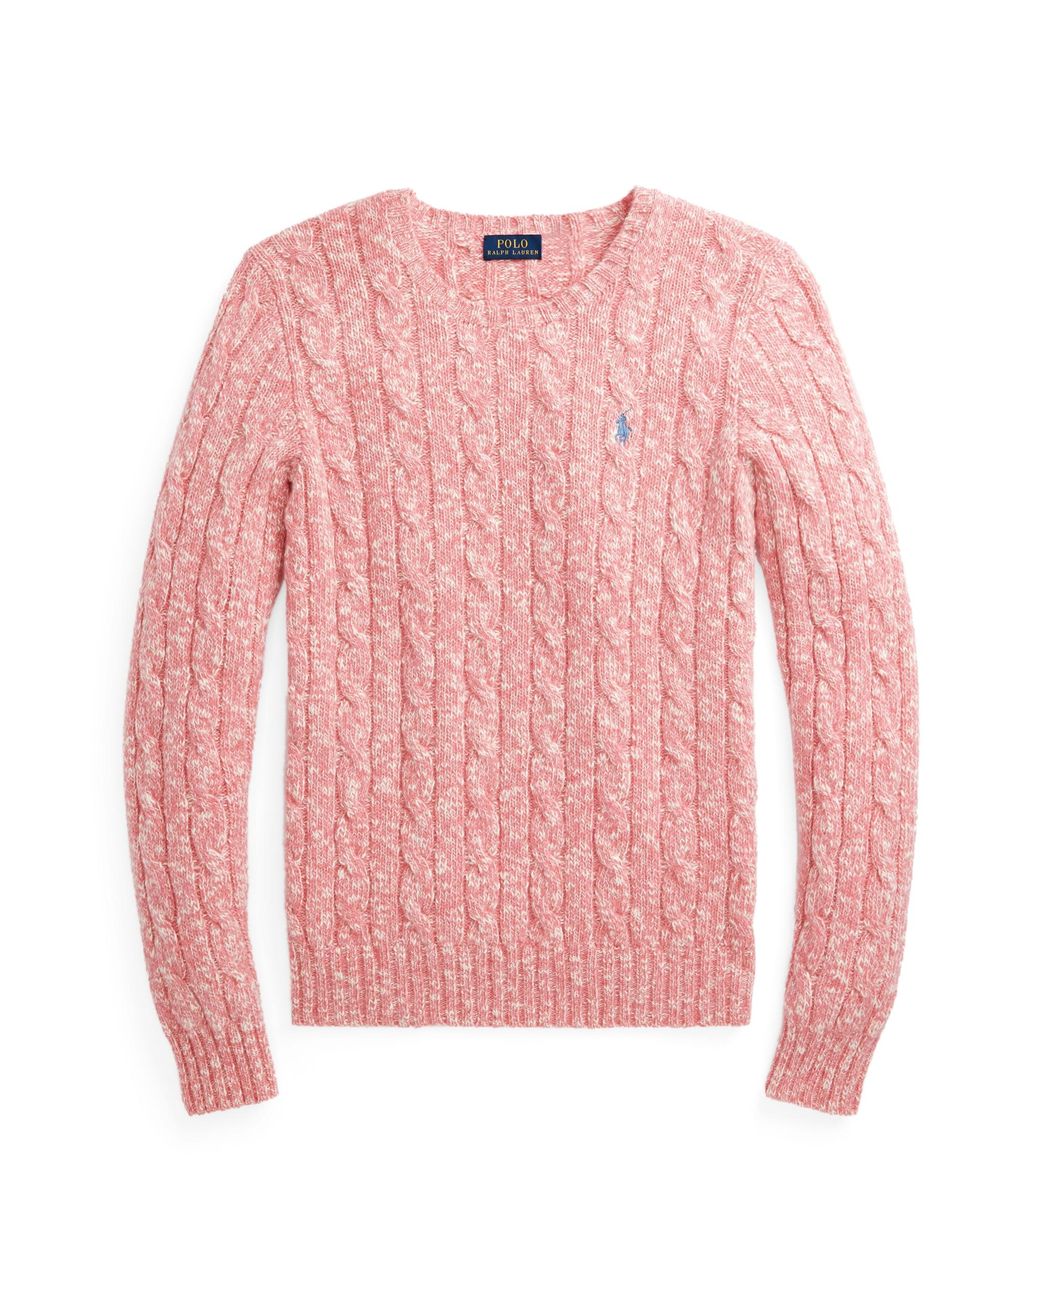 Ralph Lauren Cable-knit Wool-blend Sweater in Pink - Lyst